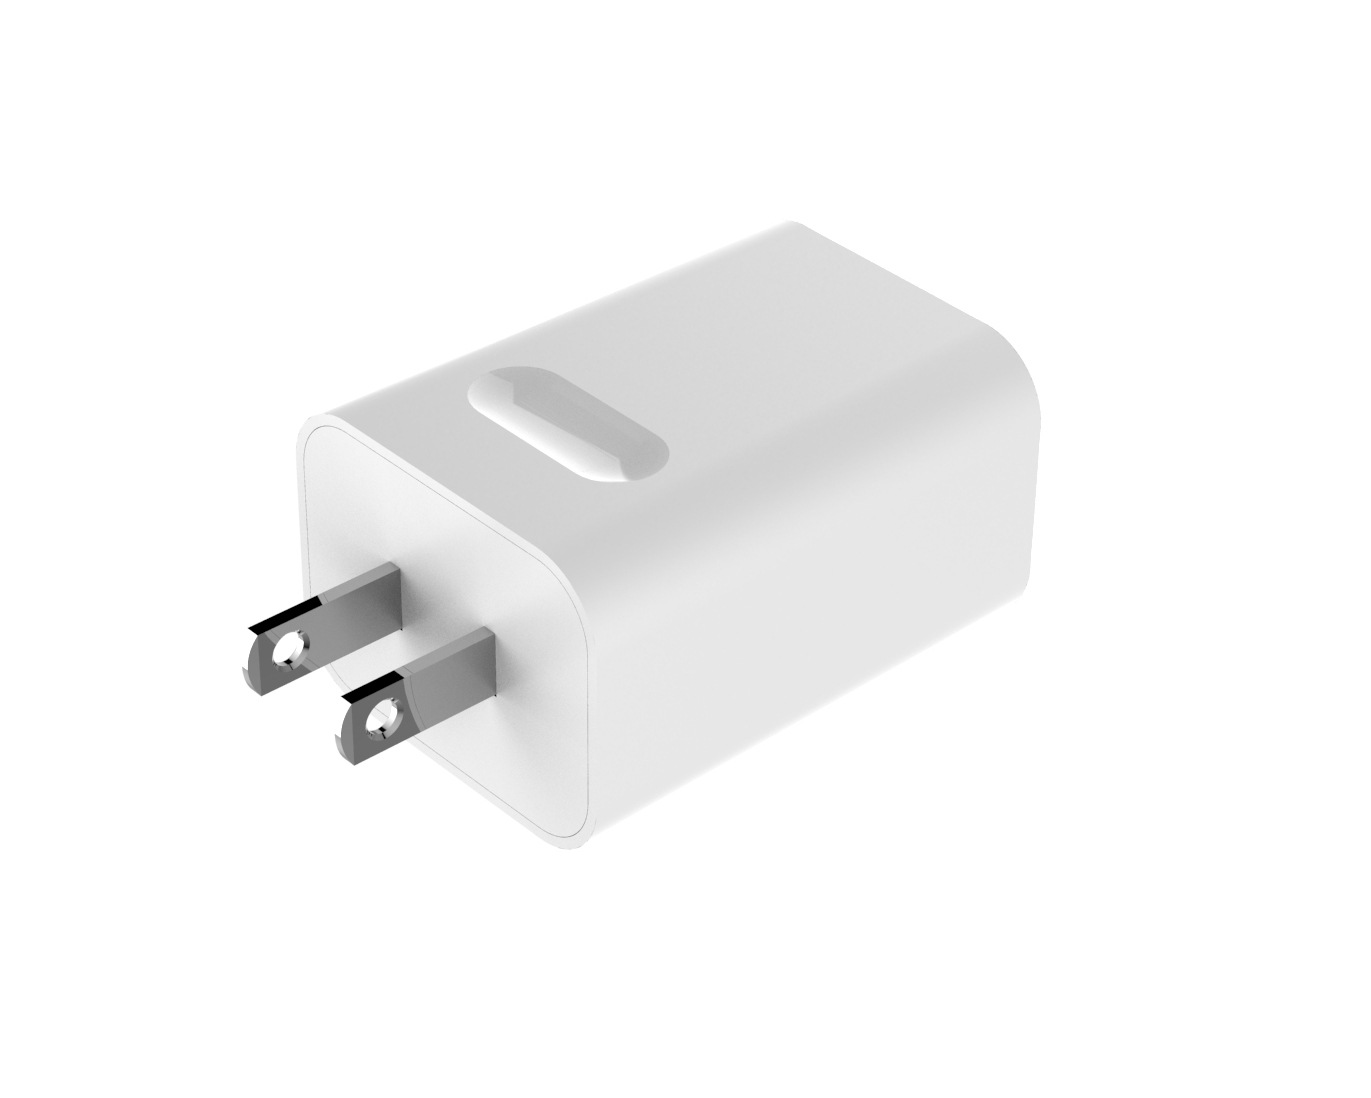 USB type C Charger with 18W USB C Power Delivery for MacBook/Air iPhone X/8/Plus